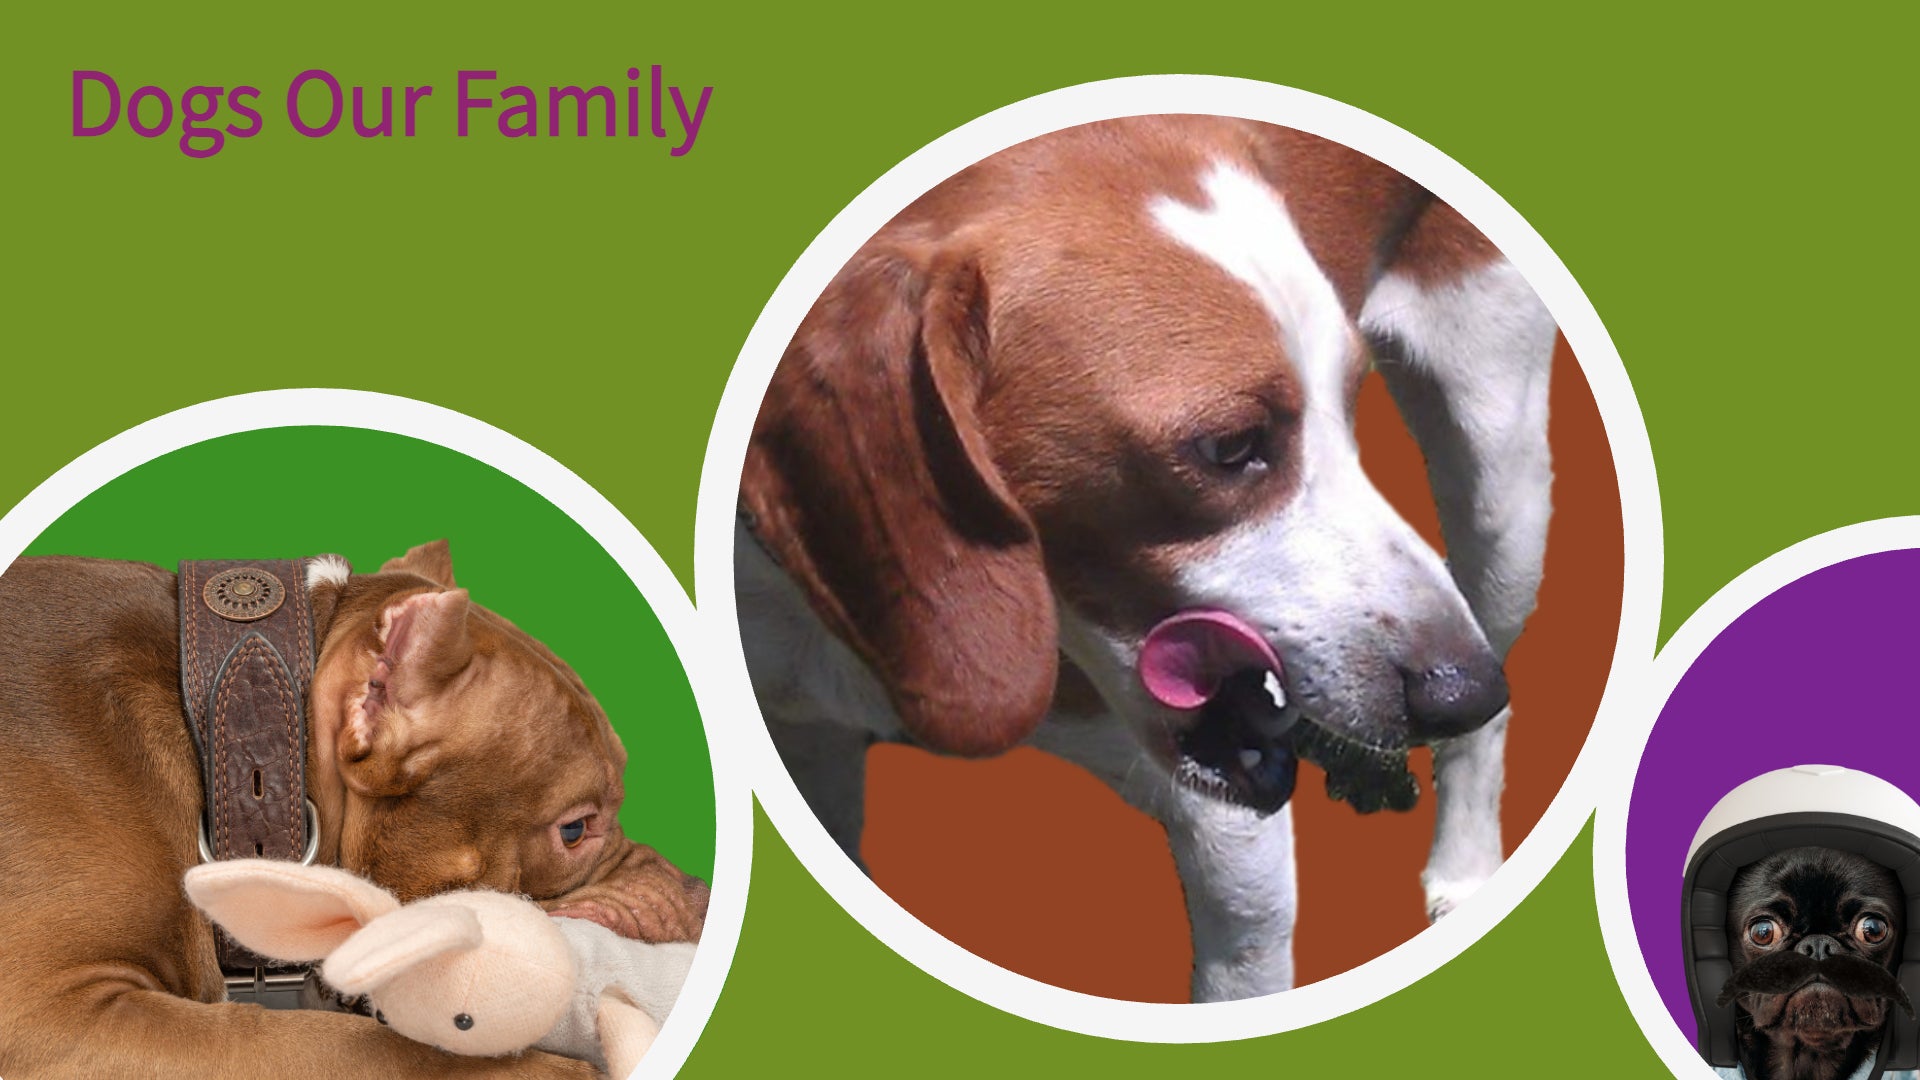 This is a picture of three dogs on a main website banner in three colorful circles.  Dogs Our Family.